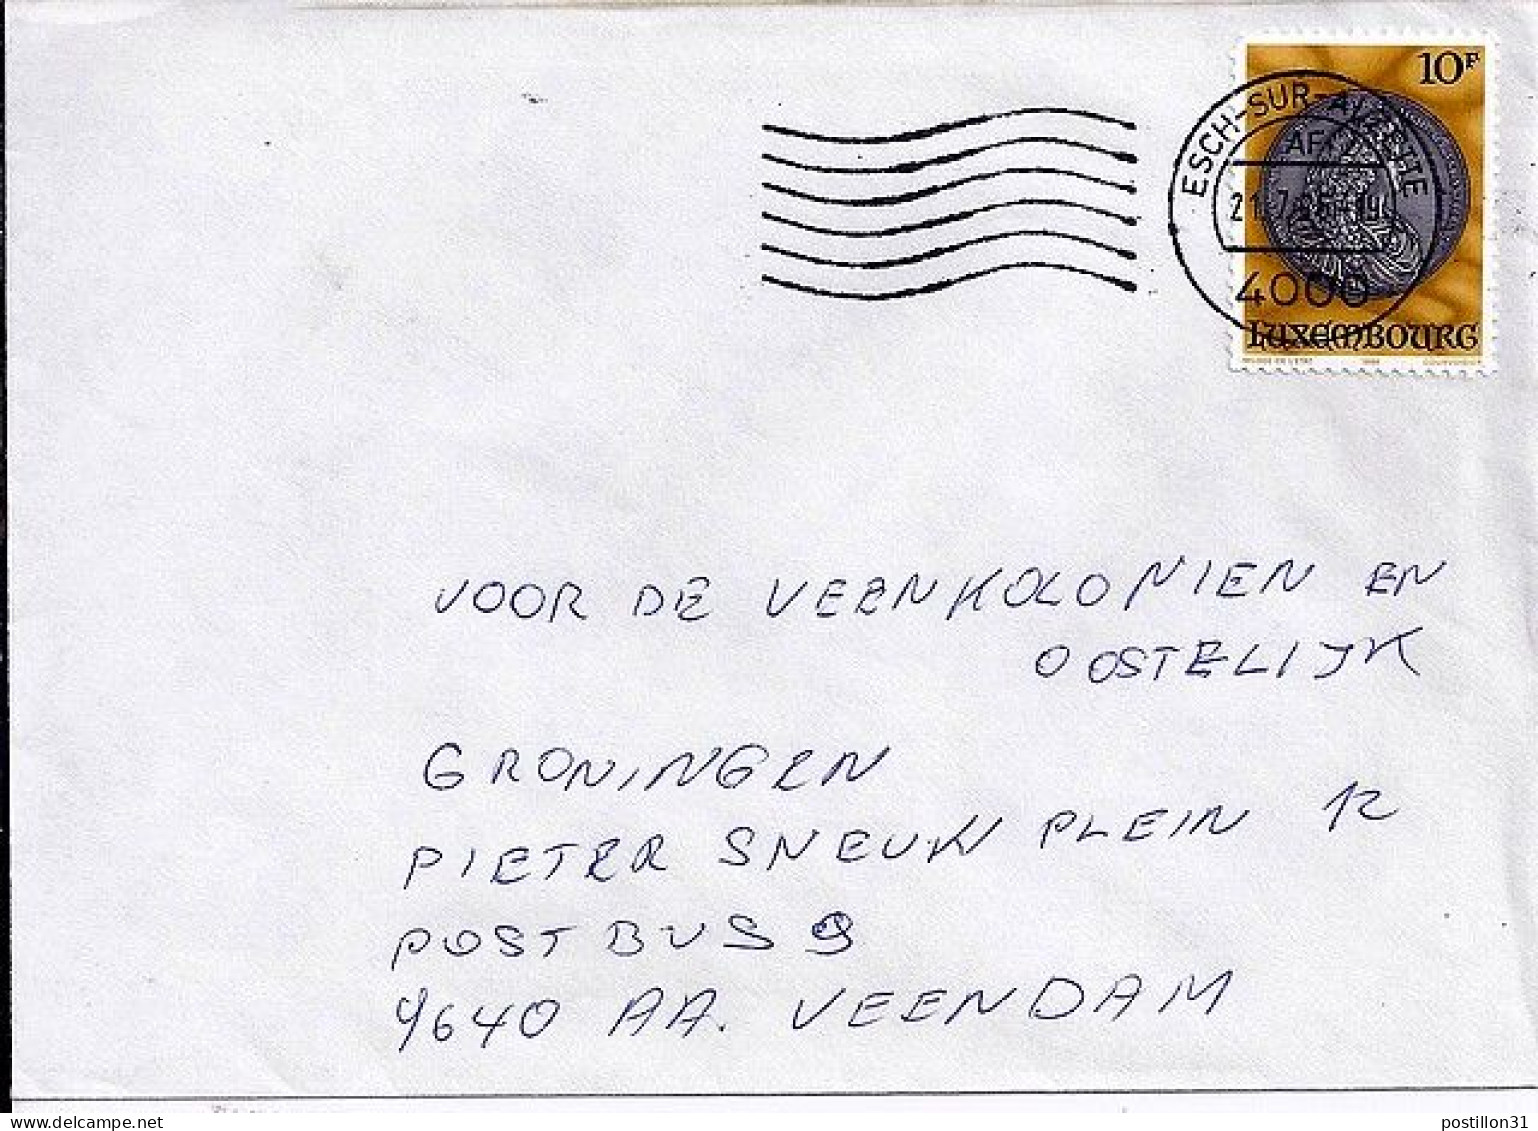 LUXEMBOURG N° 1094 S/L. DU 21.7.86 - Covers & Documents